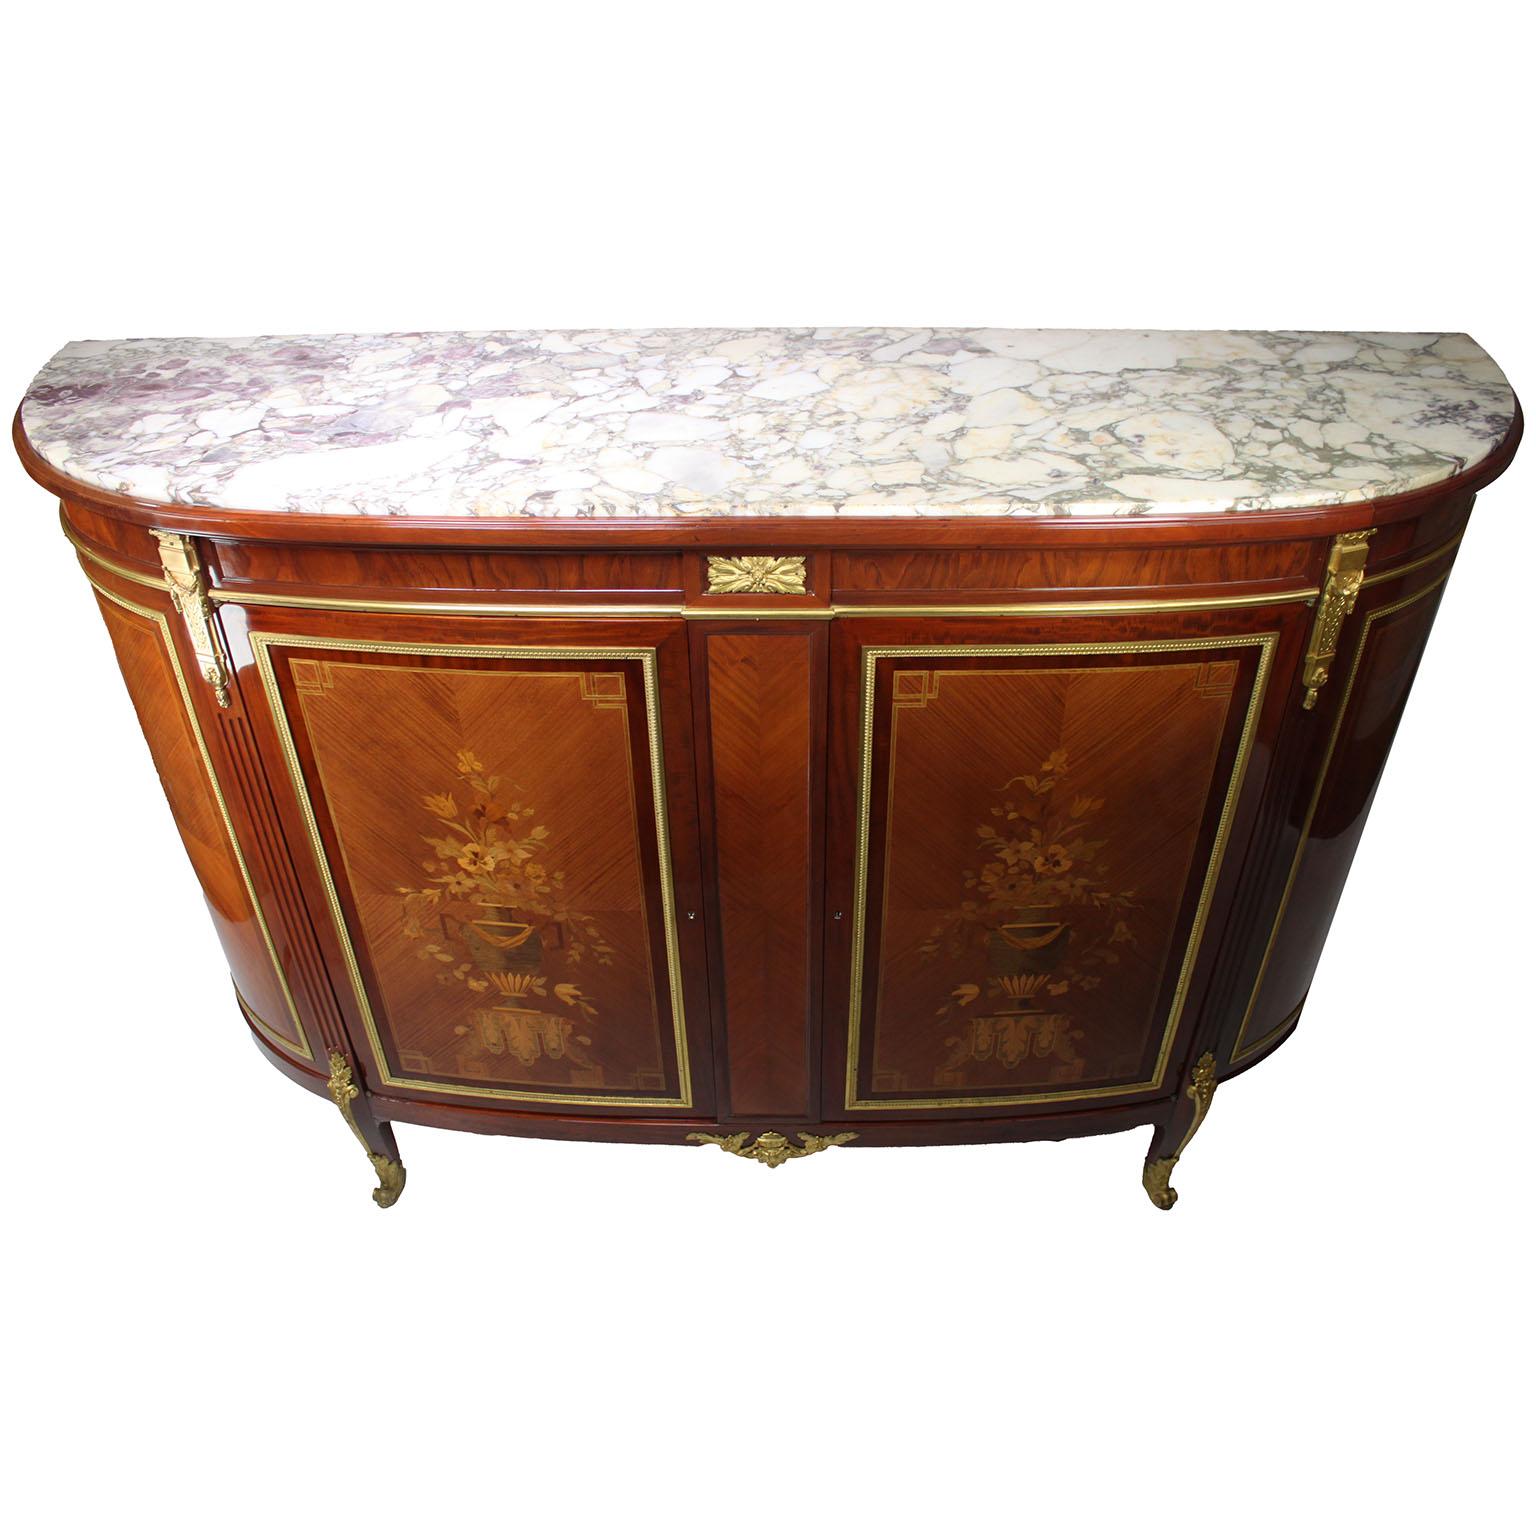 Early 20th Century French 19th-20th C. Louis XV Style Mahogany Ormolu Mounted Buffet Server Cabinet For Sale